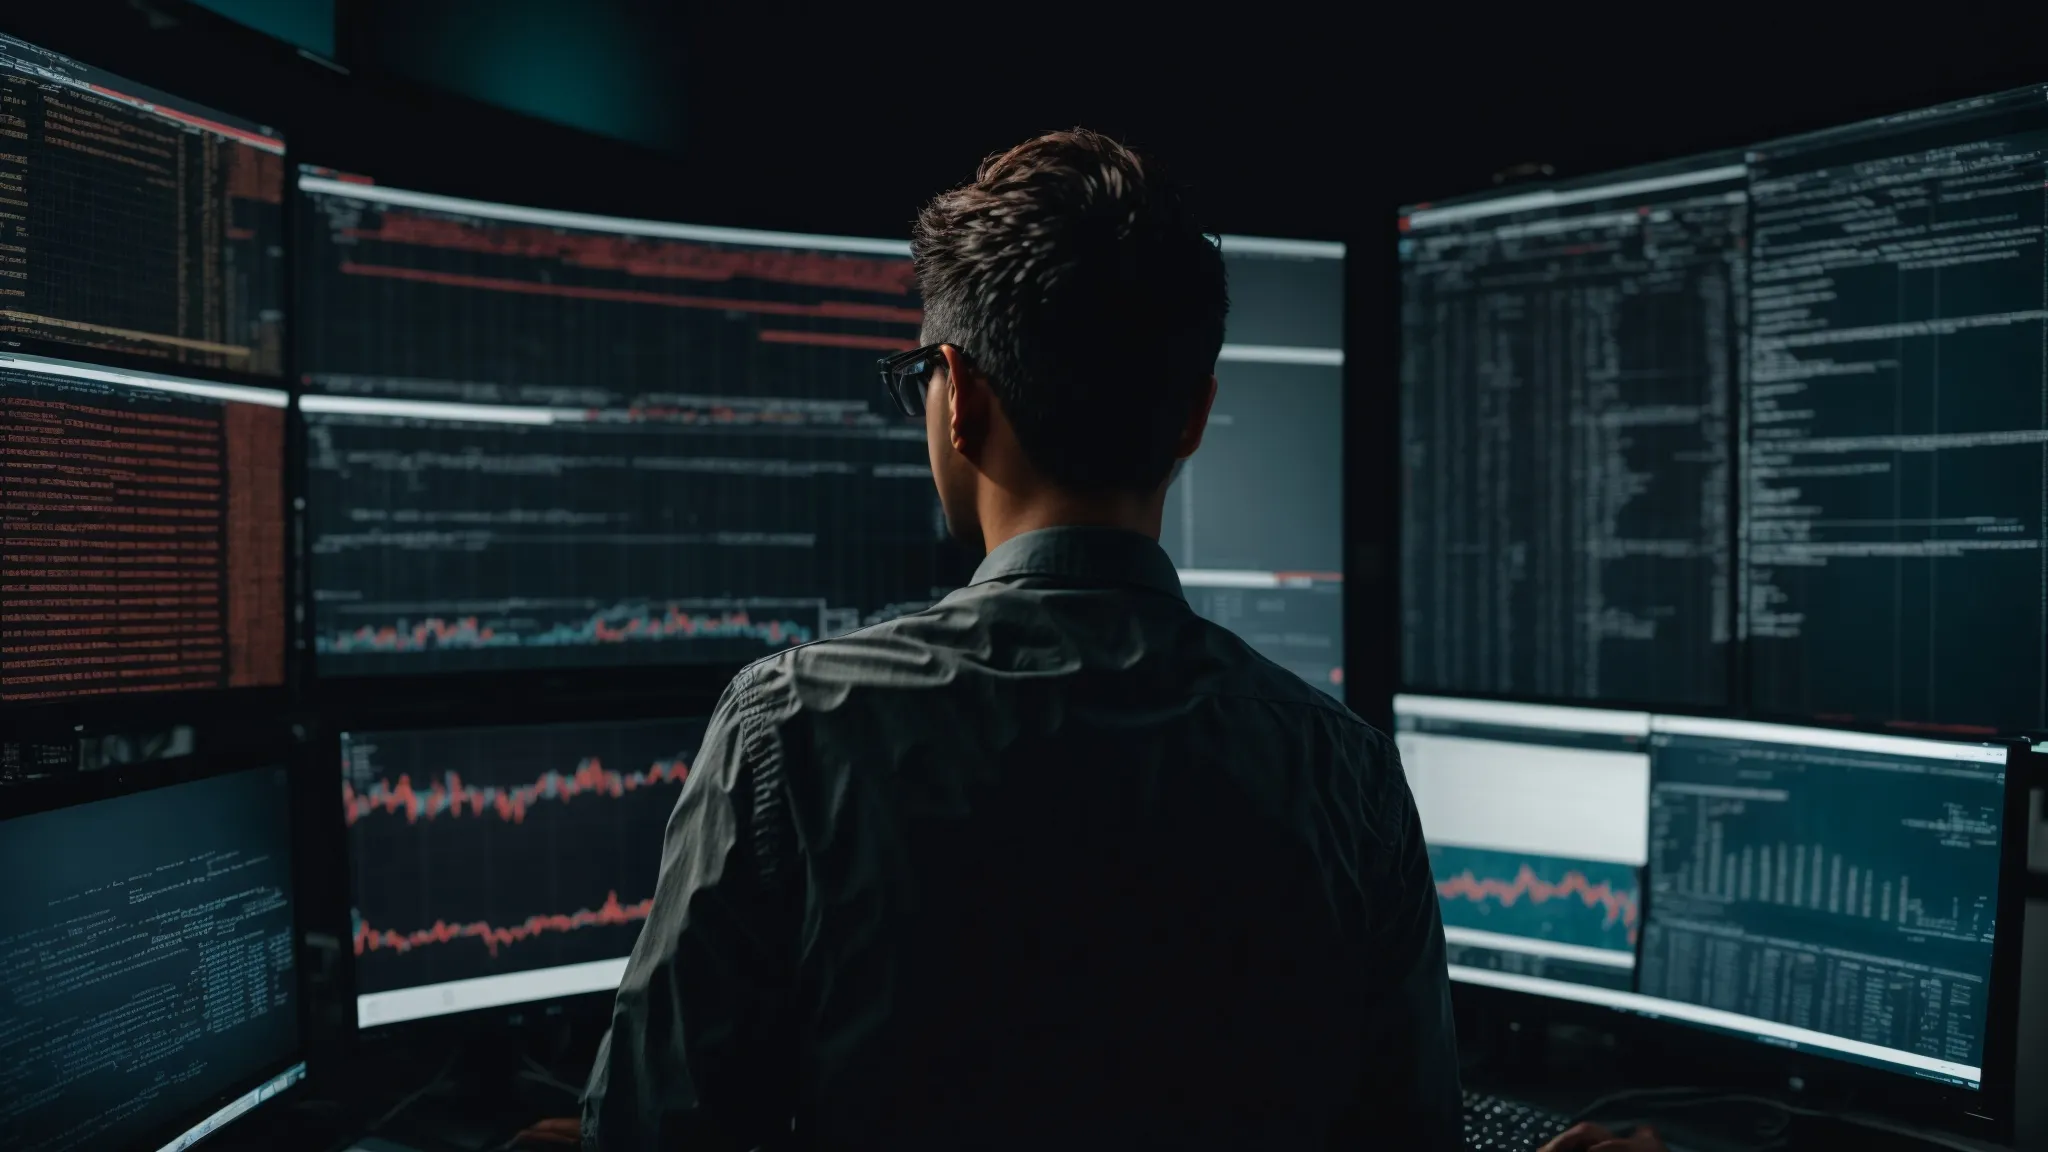 a web developer intently analyzing data on a computer screen displaying a website's backend code and performance metrics.